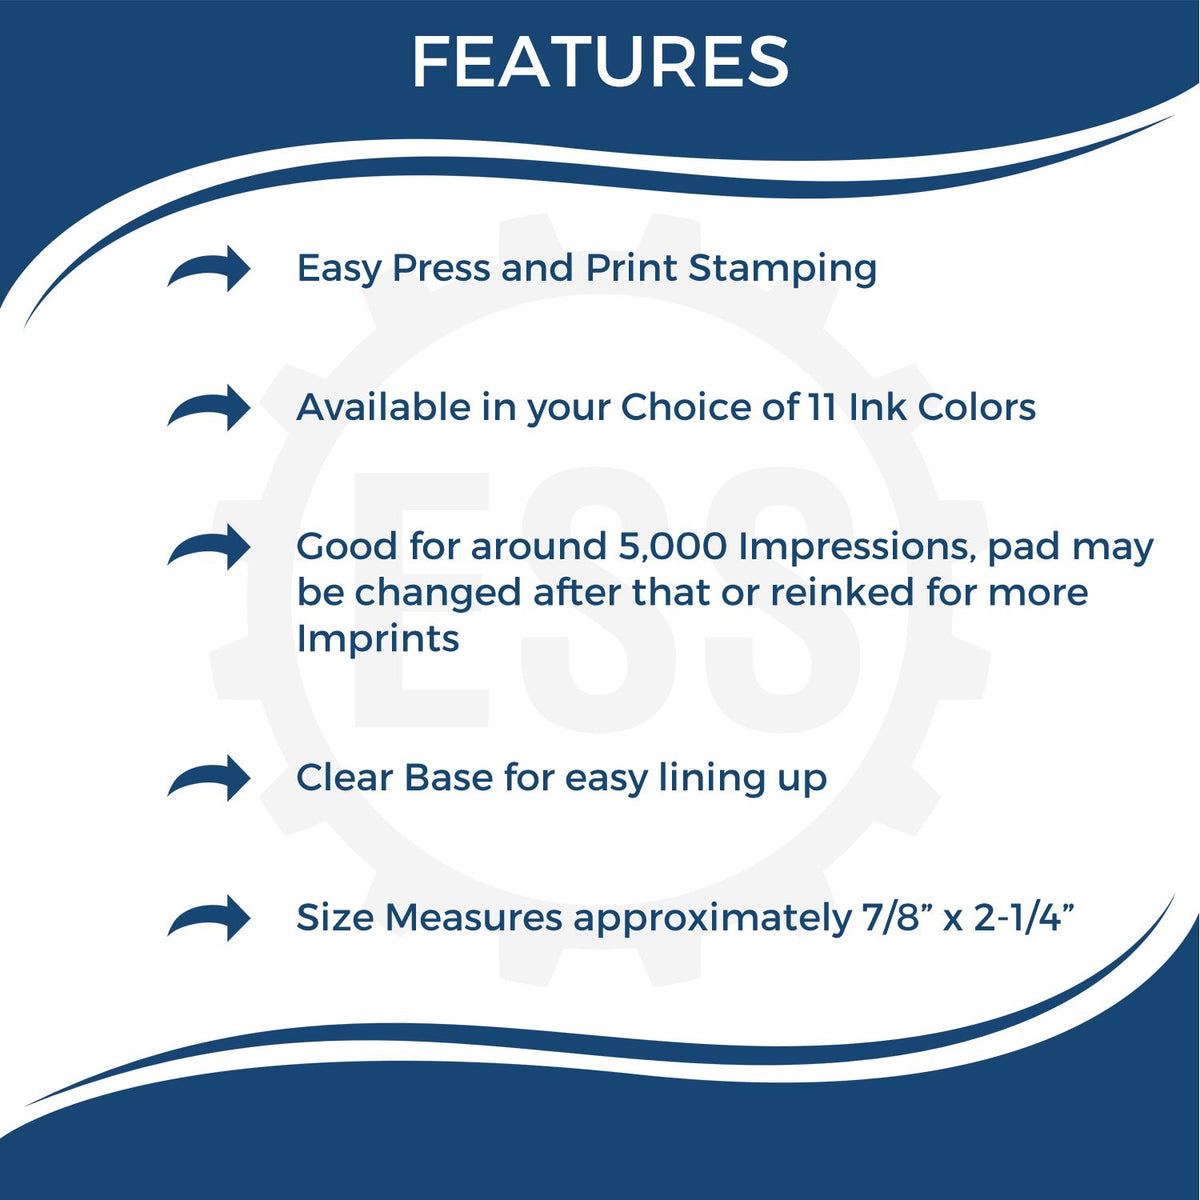 Large Self Inking Economy Rate Stamp